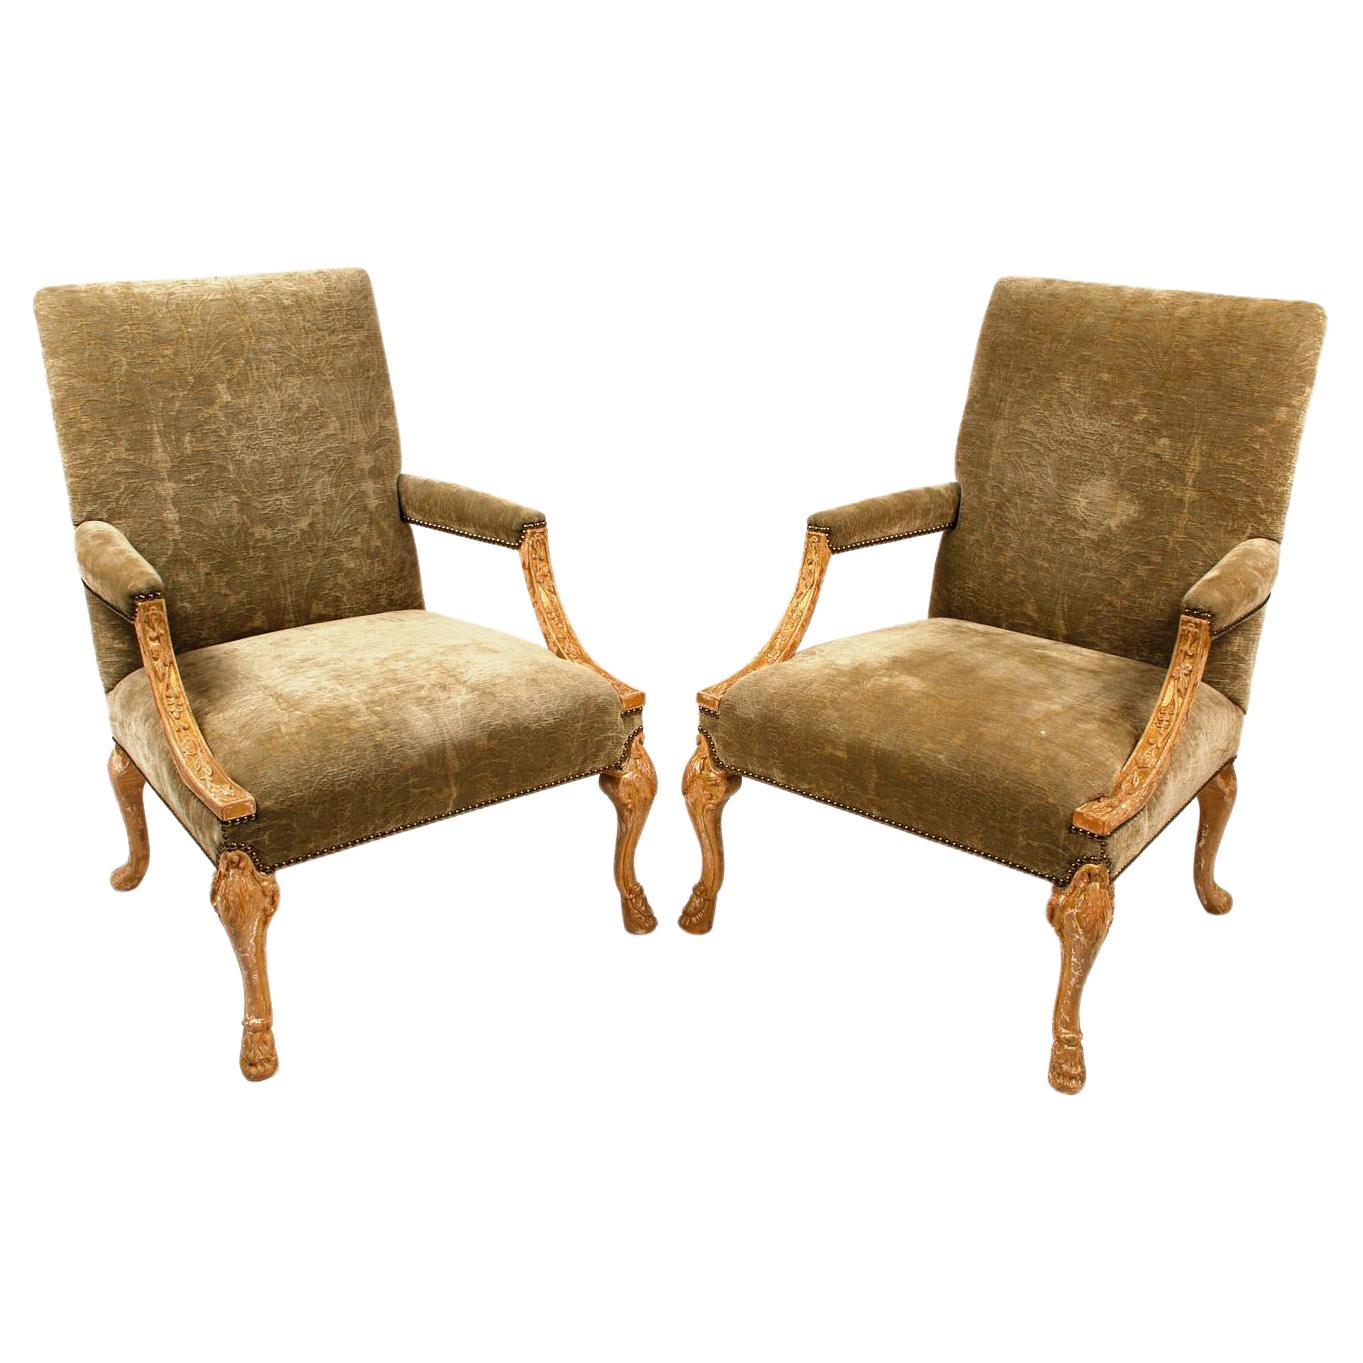 Pair of English Library Armchairs